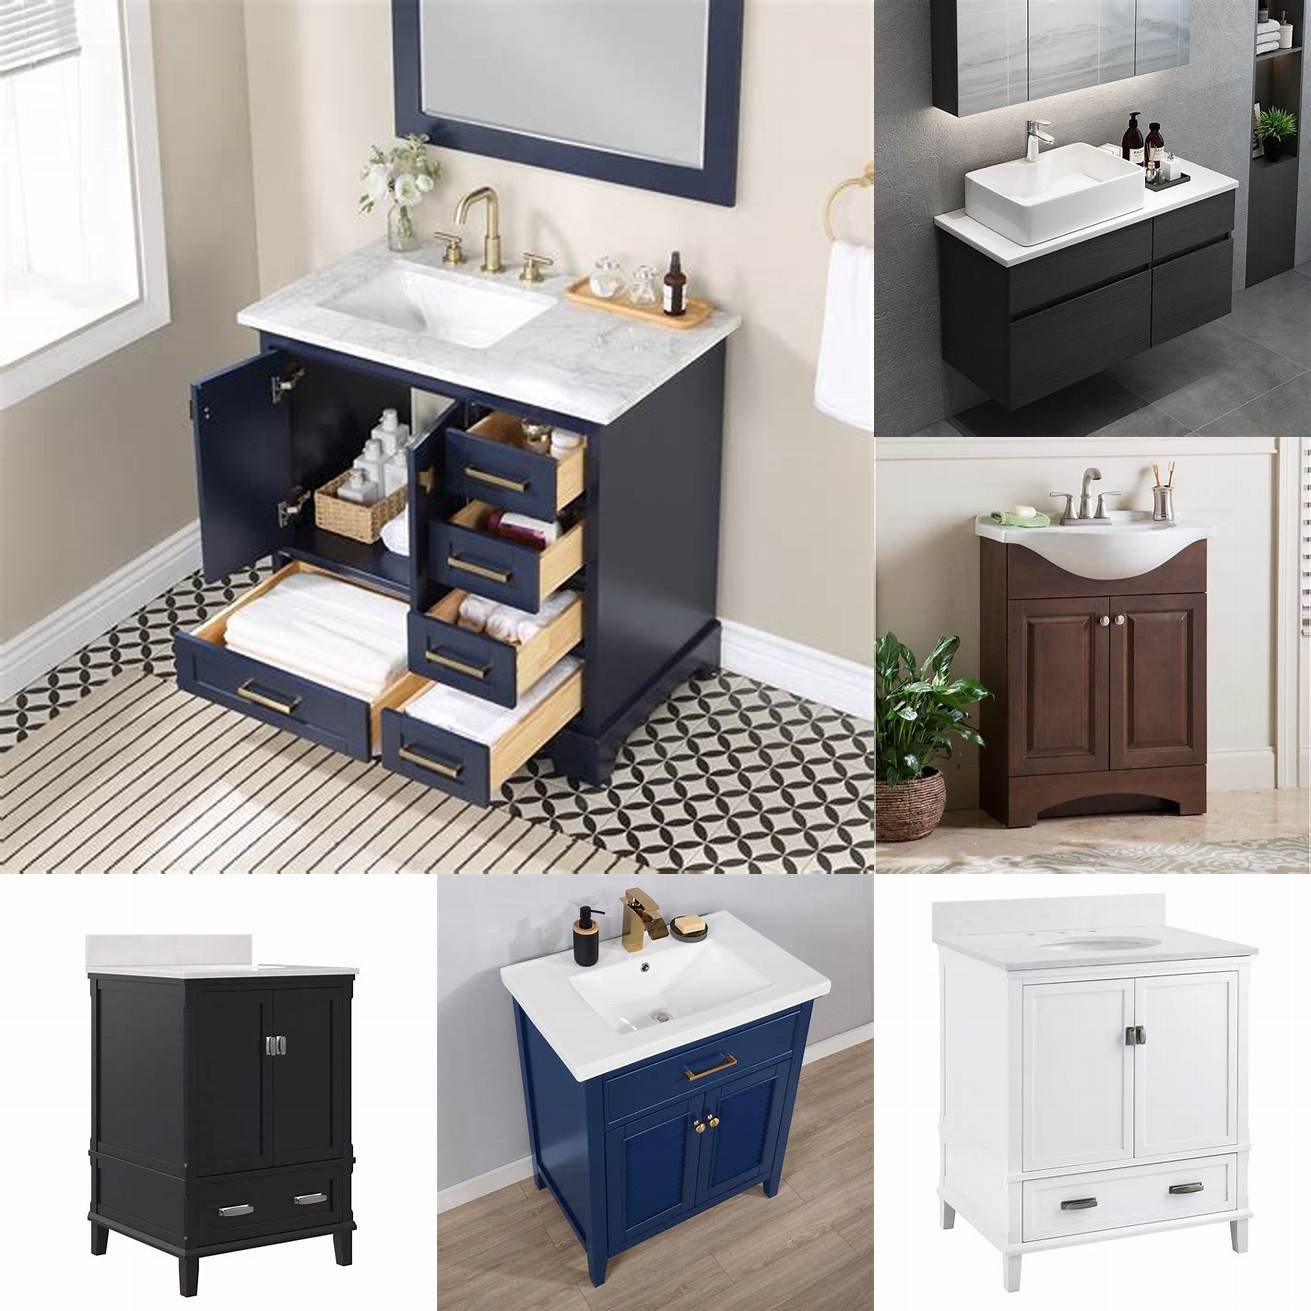 The vanity comes with a pre-installed ceramic sink